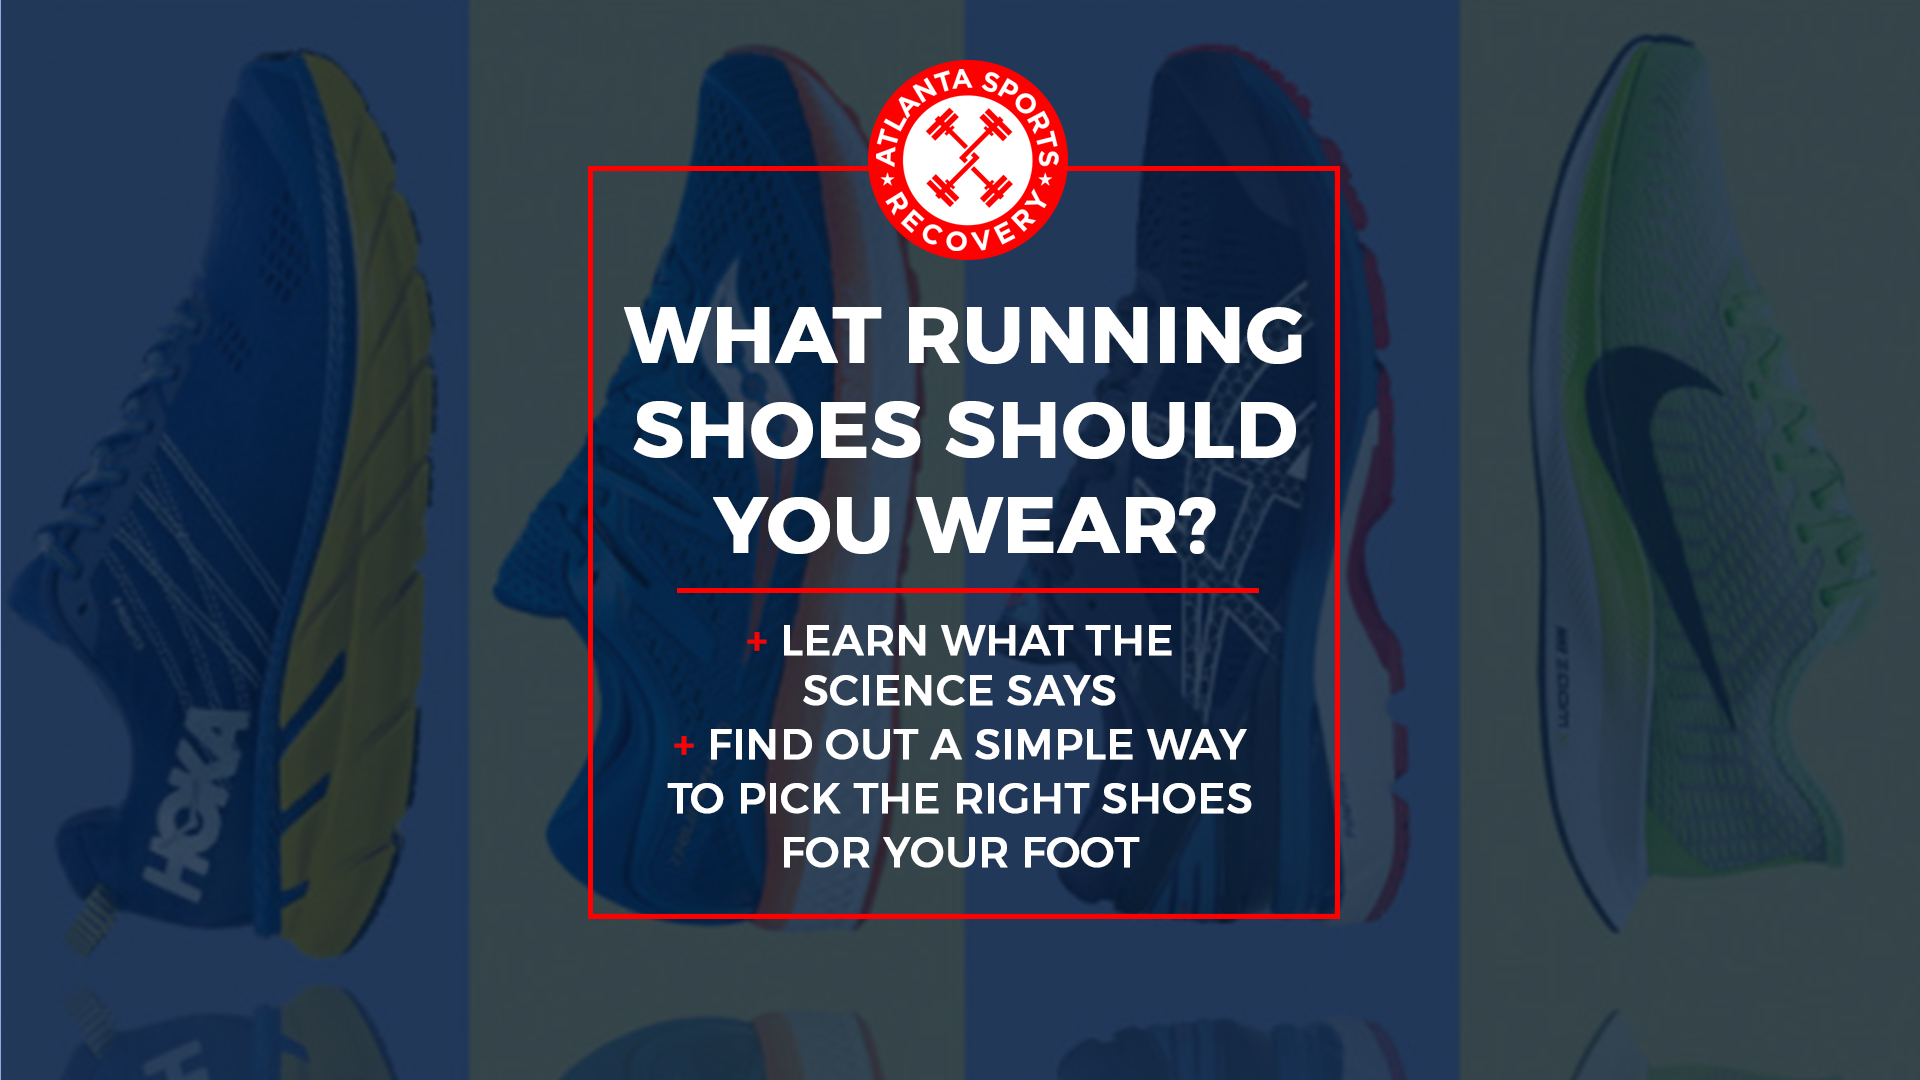 WHAT RUNNING SHOES SHOULD YOU BE WEARING?